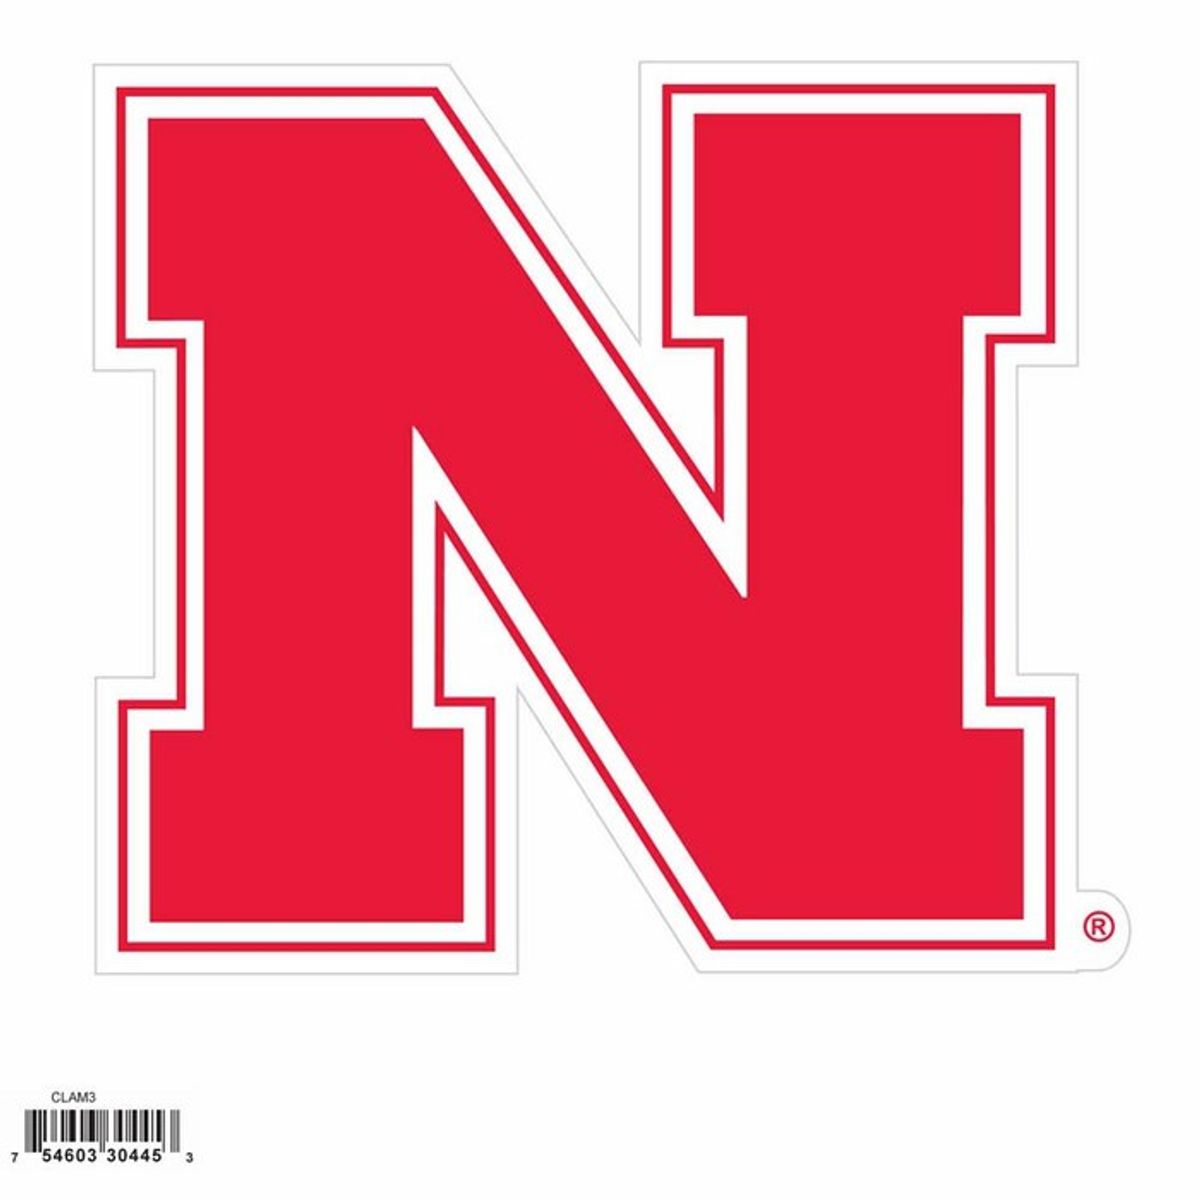 8 Things You Learn At A Husker Game